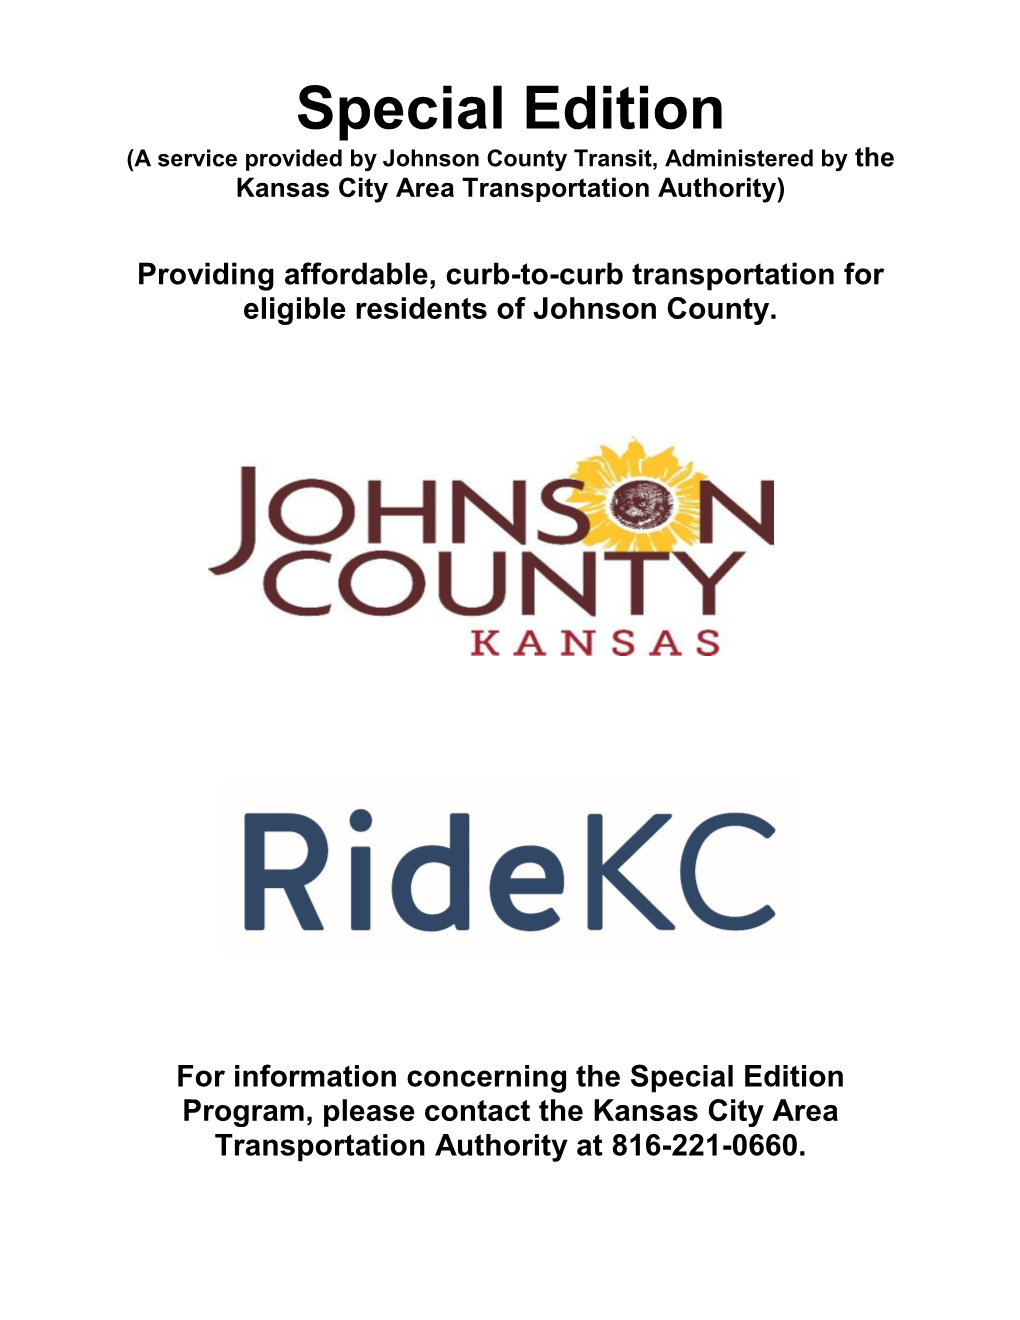 Special Edition (A Service Provided by Johnson County Transit, Administered by the Kansas City Area Transportation Authority)